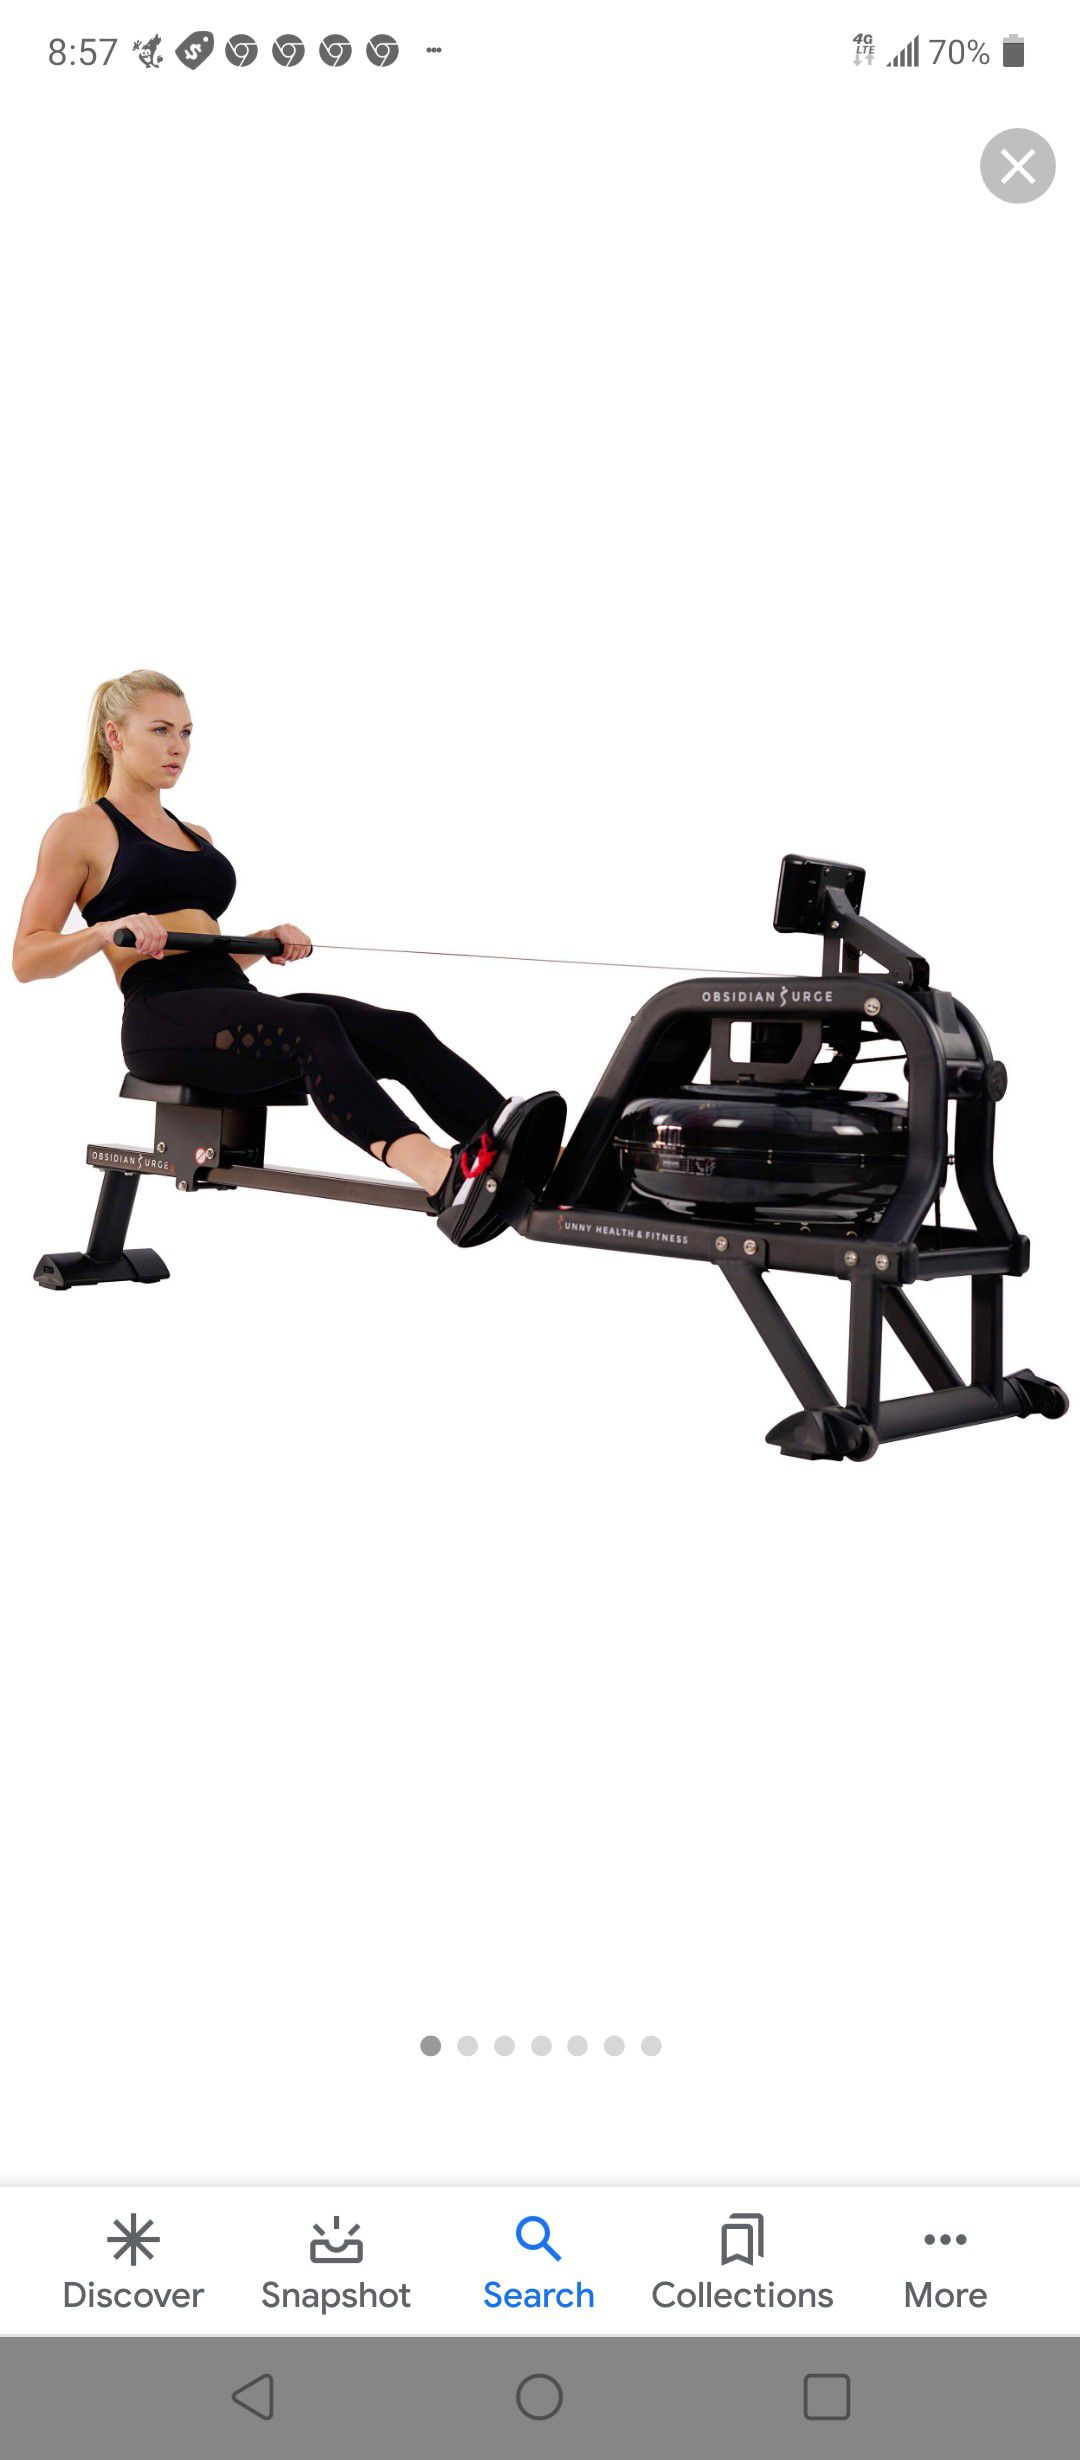 Obsidian surge rower